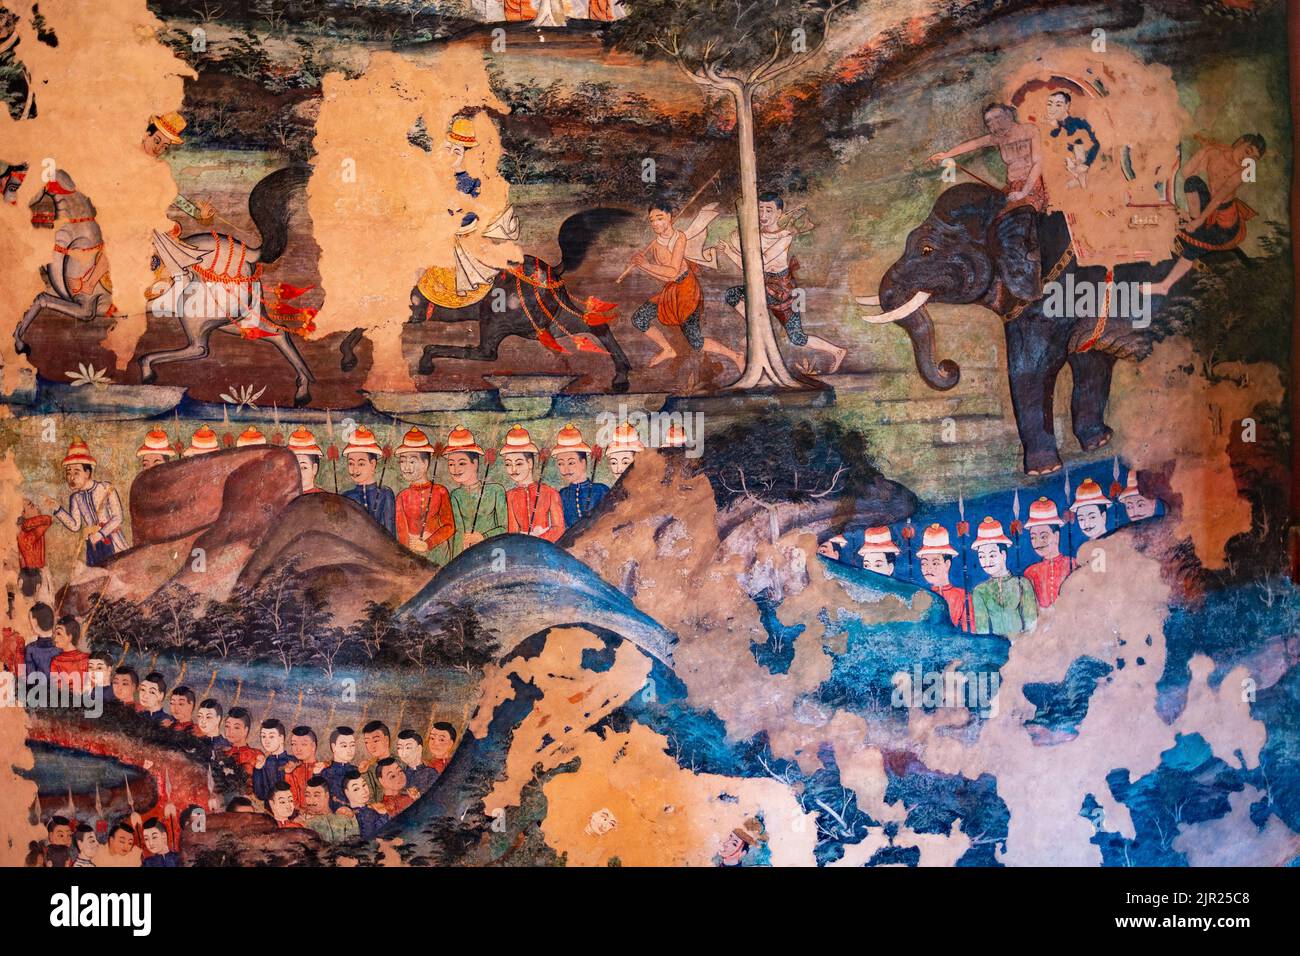 Details of the old wall paintings showing the life of Buddha in the Wat Phra Singh temple, Thailand Stock Photo